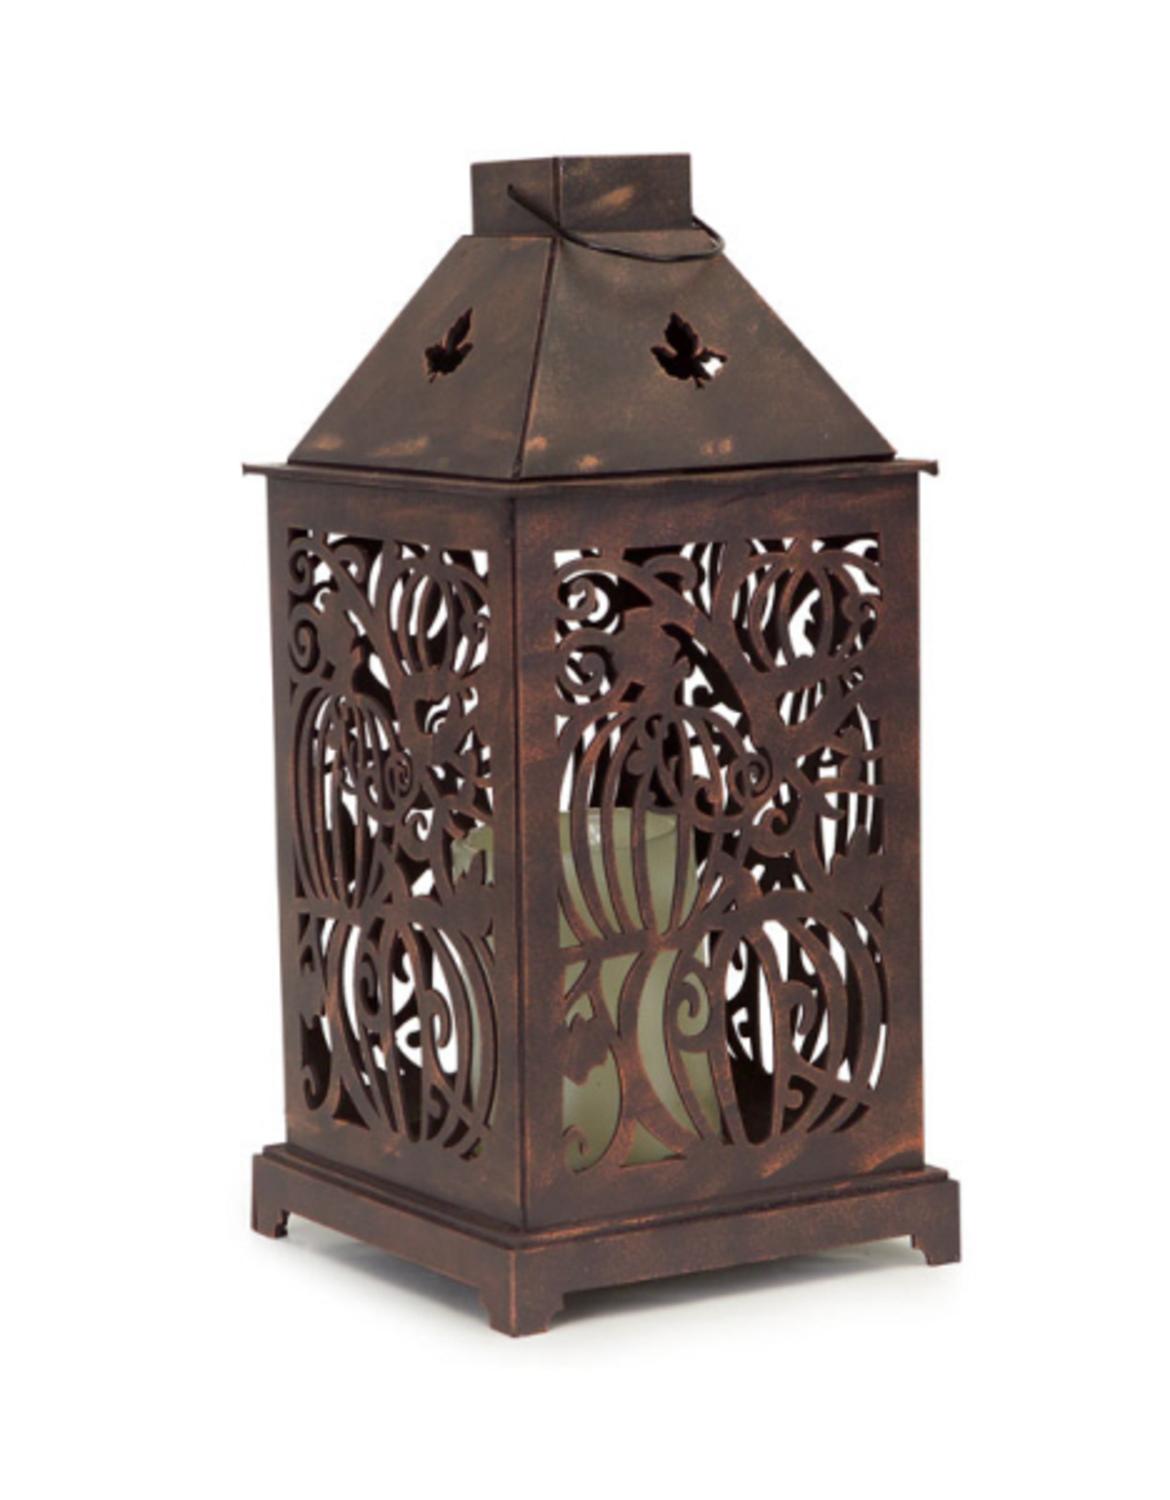 Melrose 13.25" Battery Operated Rustic Brown Swirling Pumpkin and Maple Leaf Cut Out Halloween Lantern with 4 and 8 Hour Timer